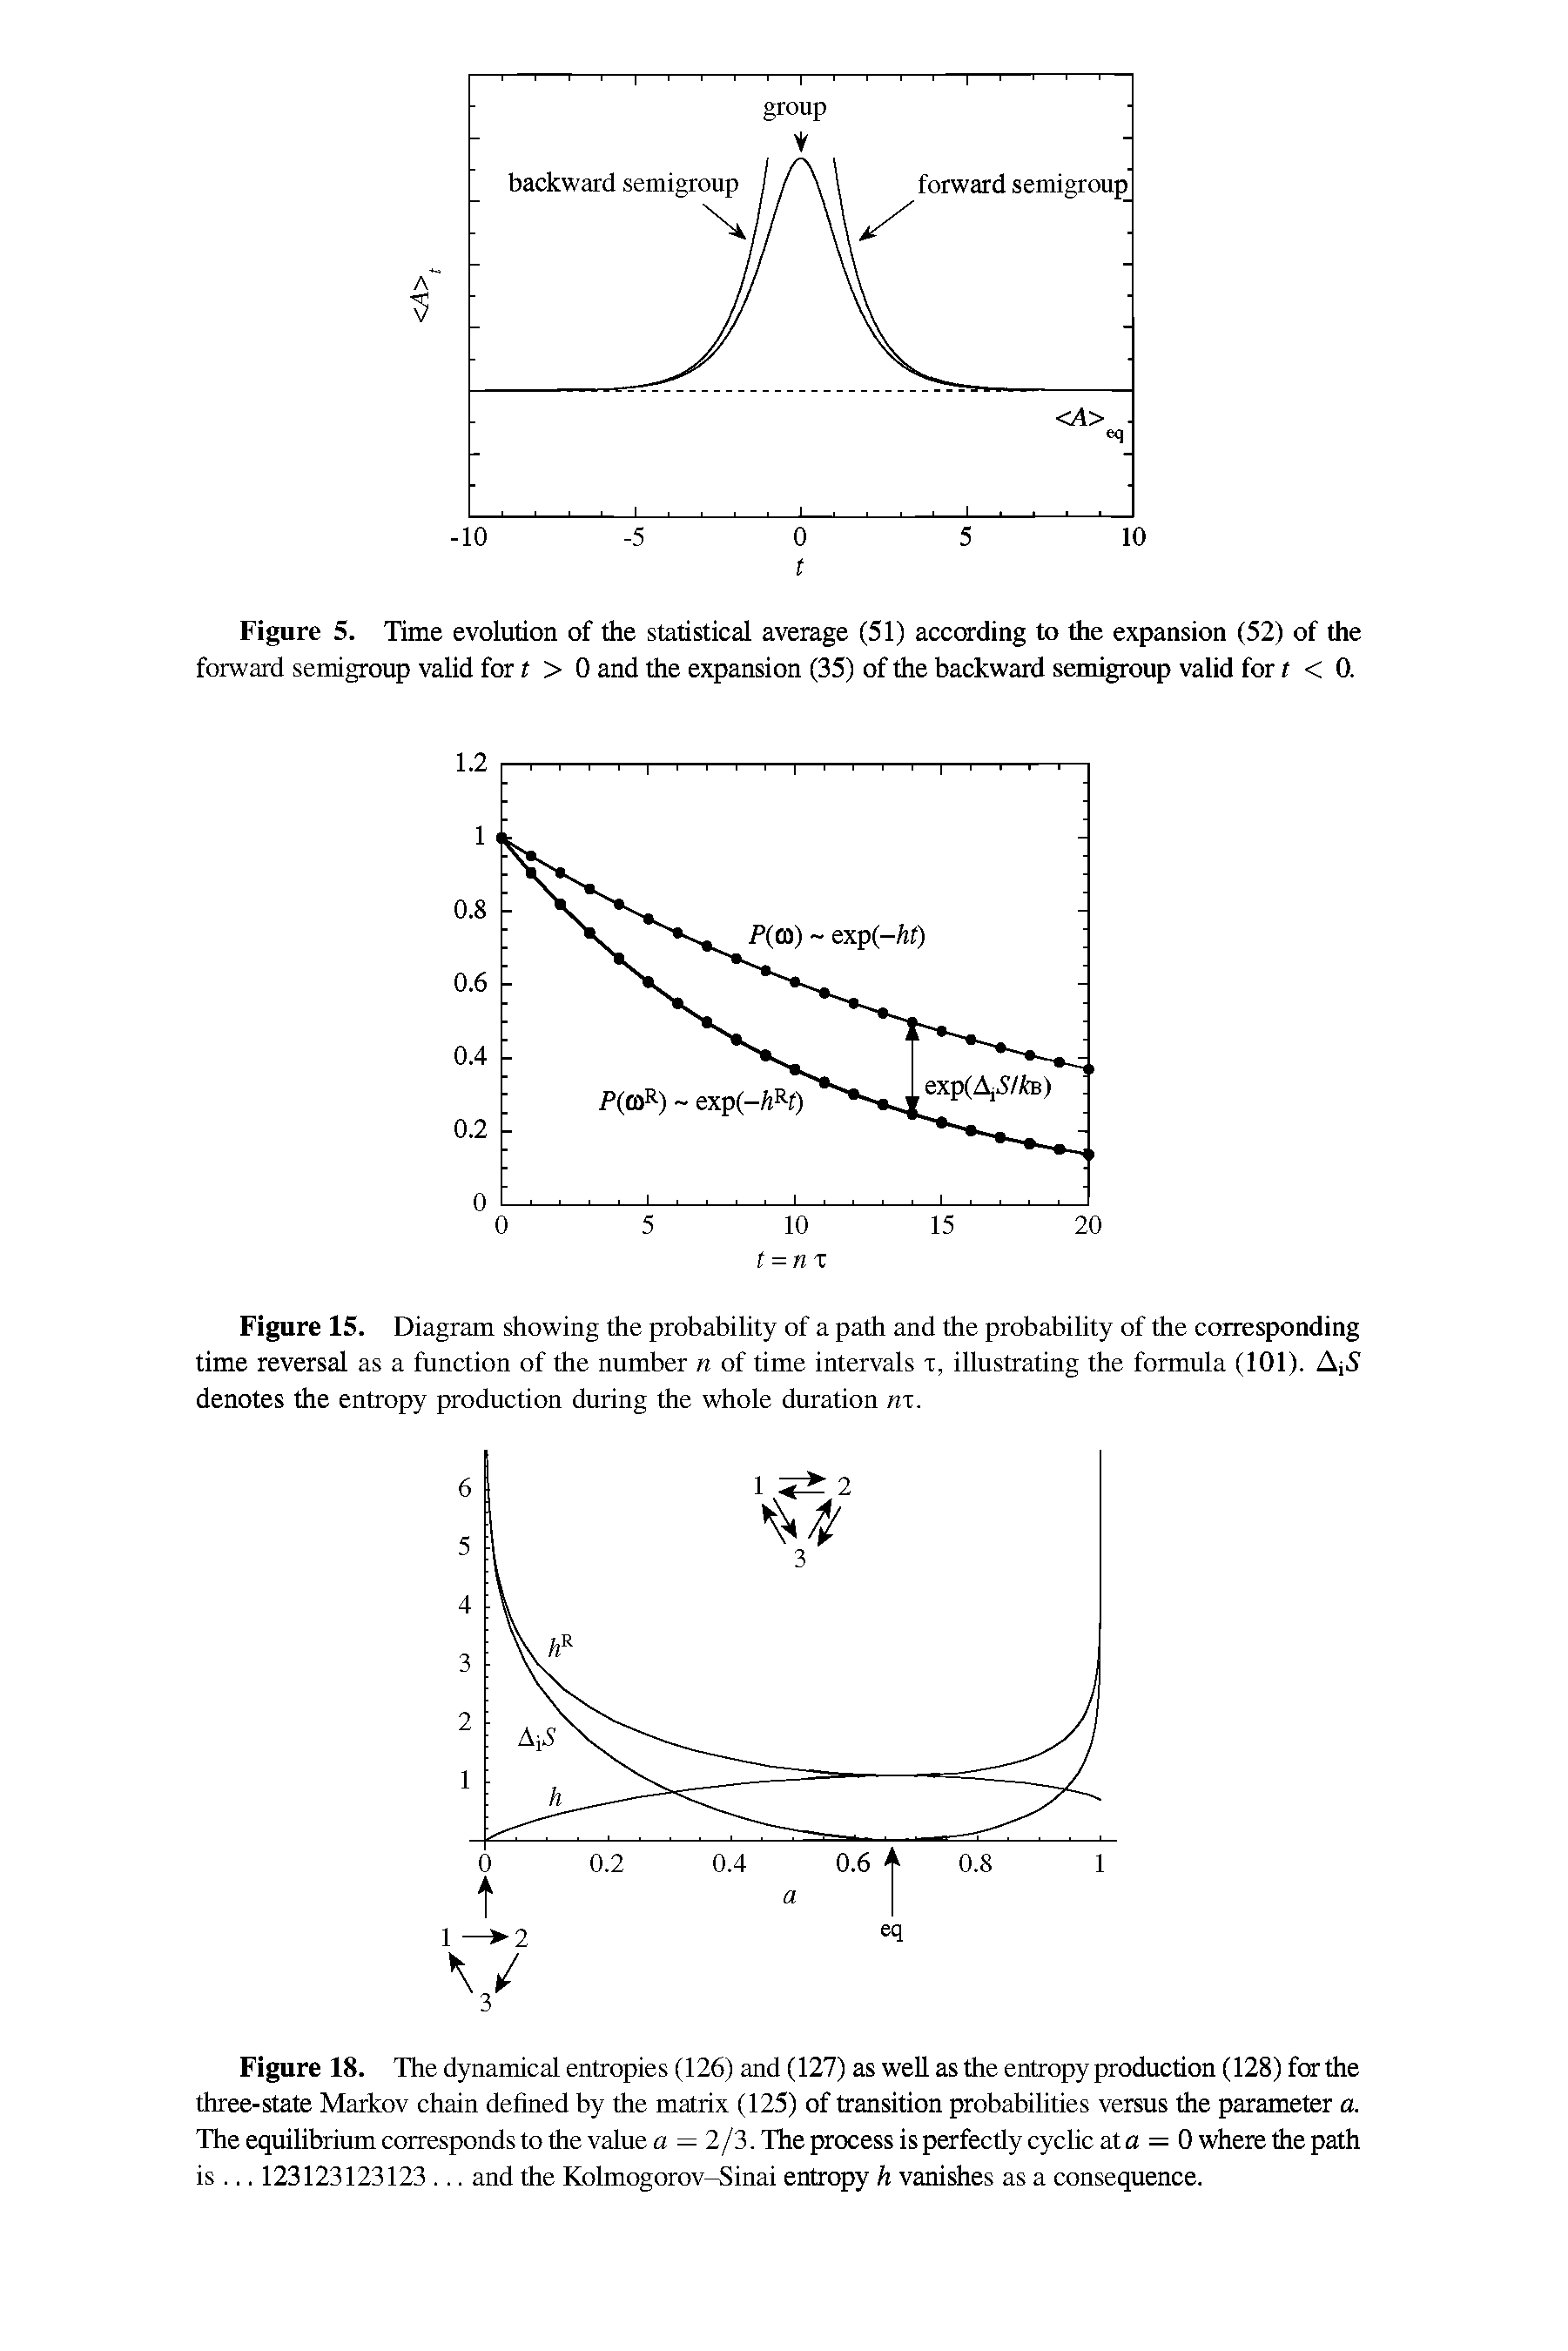 Figure 18. The dynamical entropies (126) and (127) as well as the entropy production (128) for the three-state Markov chain defined by the matrix (125) of transition probabilities versus the parameter a. The equilibrium corresponds to the value a = 2j3. The process is perfectly cyclic at a = 0 where the path is. .. 123123123123. .. and the Kolmogorov-Sinai entropy h vanishes as a consequence.